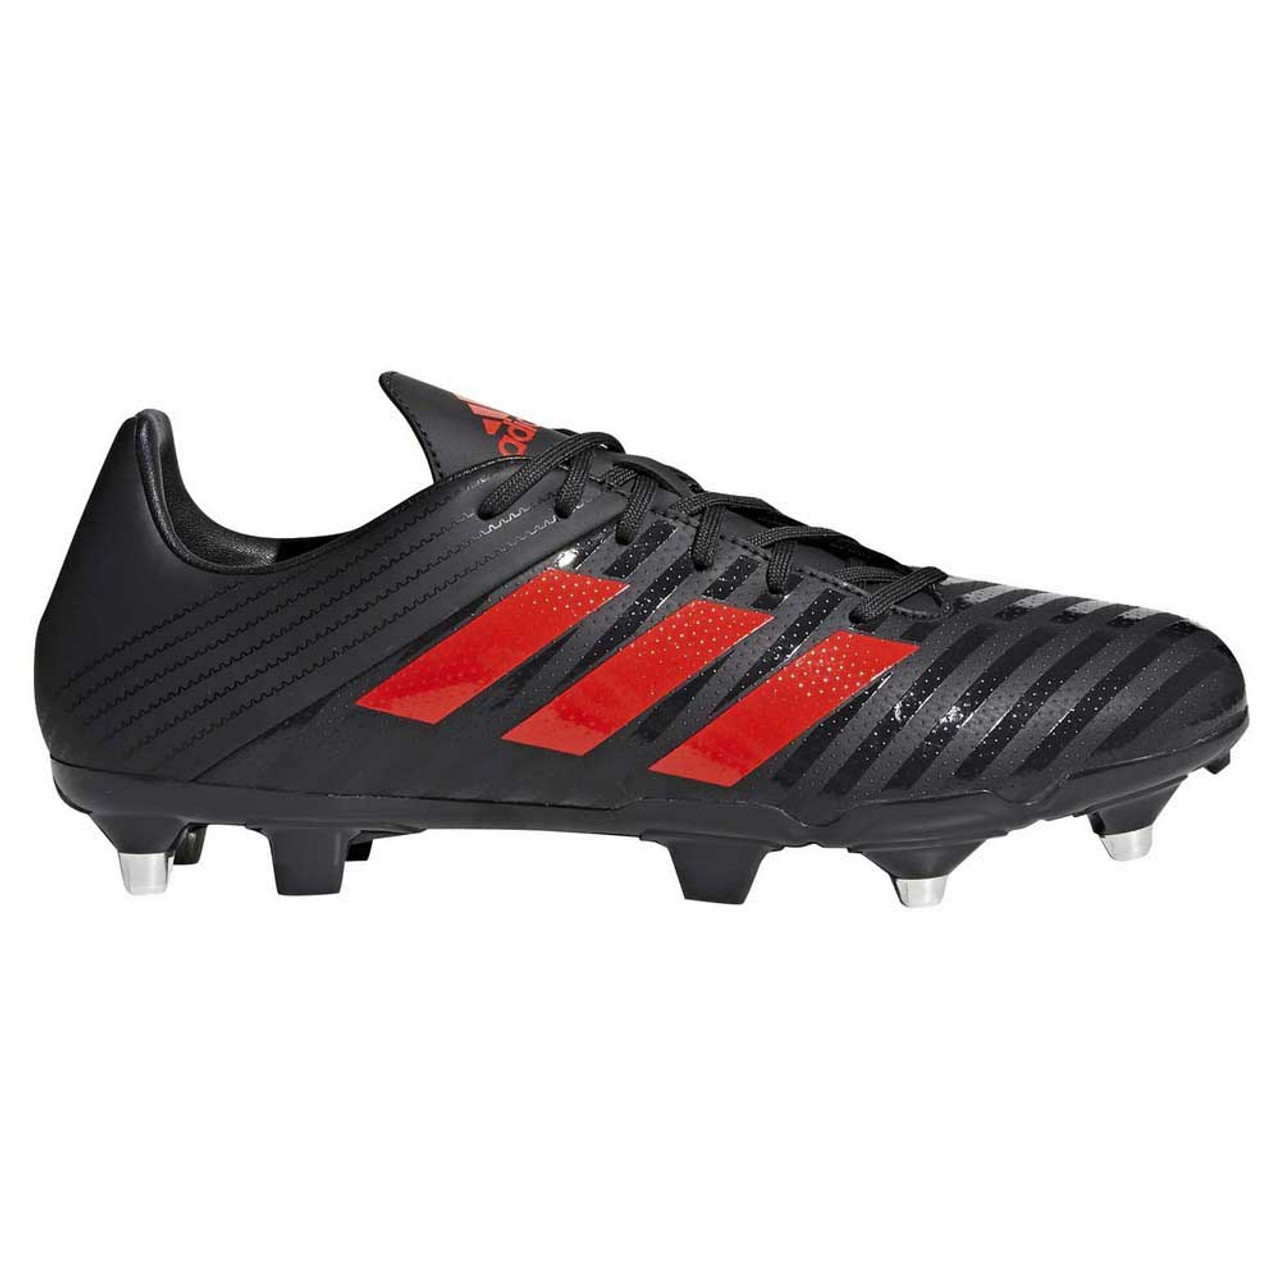 Adidas Malice Control SG Boots - on sale at Rugby City | 79.99